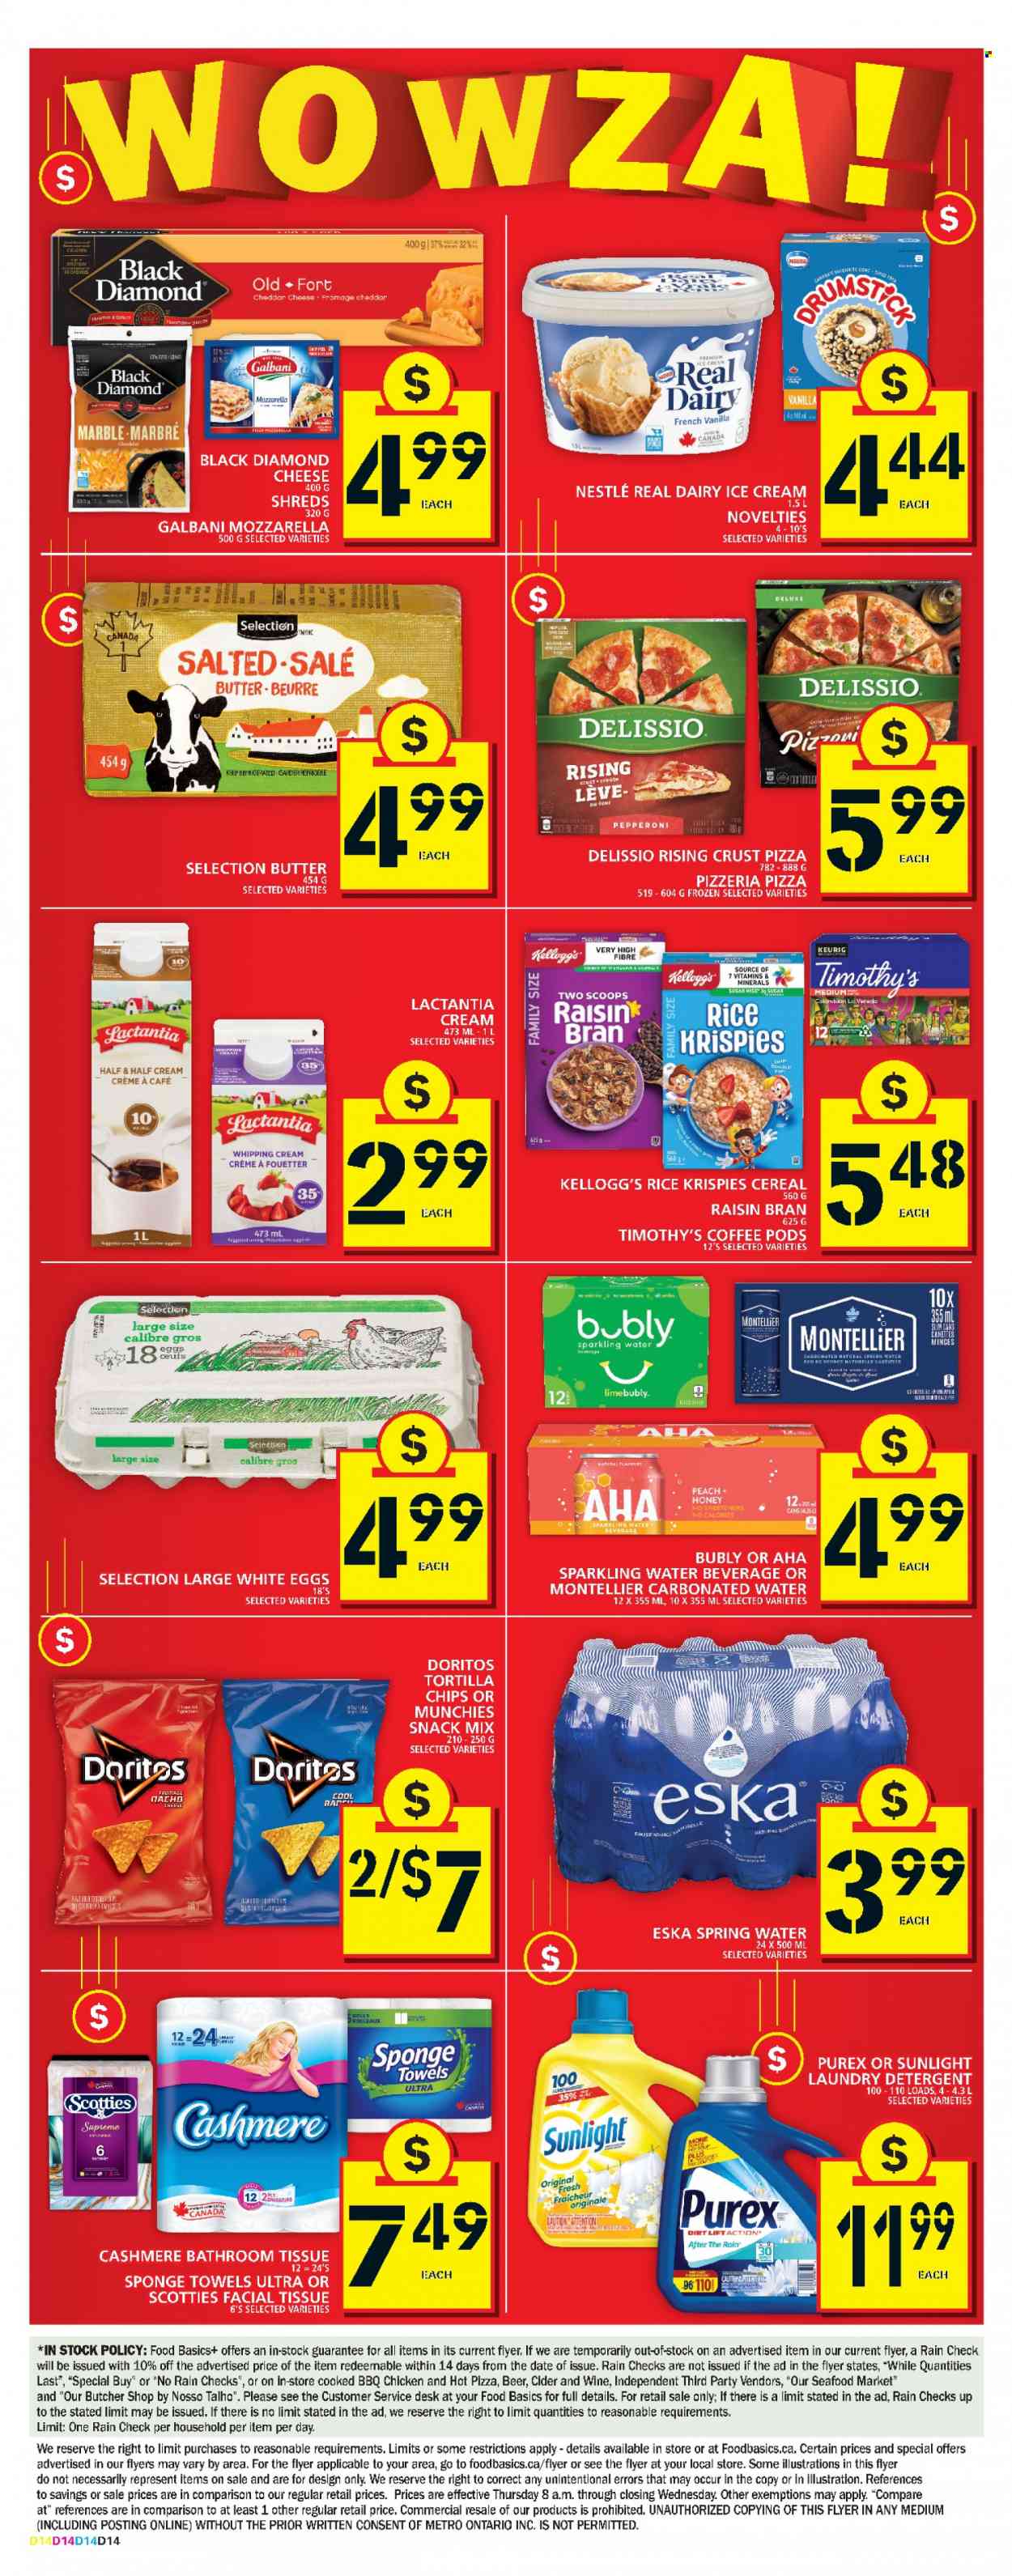 thumbnail - Food Basics Flyer - January 26, 2023 - February 01, 2023 - Sales products - seafood, pizza, pepperoni, Galbani, eggs, whipping cream, ice cream, snack, Kellogg's, Doritos, tortilla chips, cereals, Rice Krispies, Raisin Bran, honey, spring water, sparkling water, coffee, coffee pods, Keurig, wine, cider, beer, Half and half, bath tissue, laundry detergent, Sunlight, Purex, sponge, towel, detergent, Nestlé. Page 2.